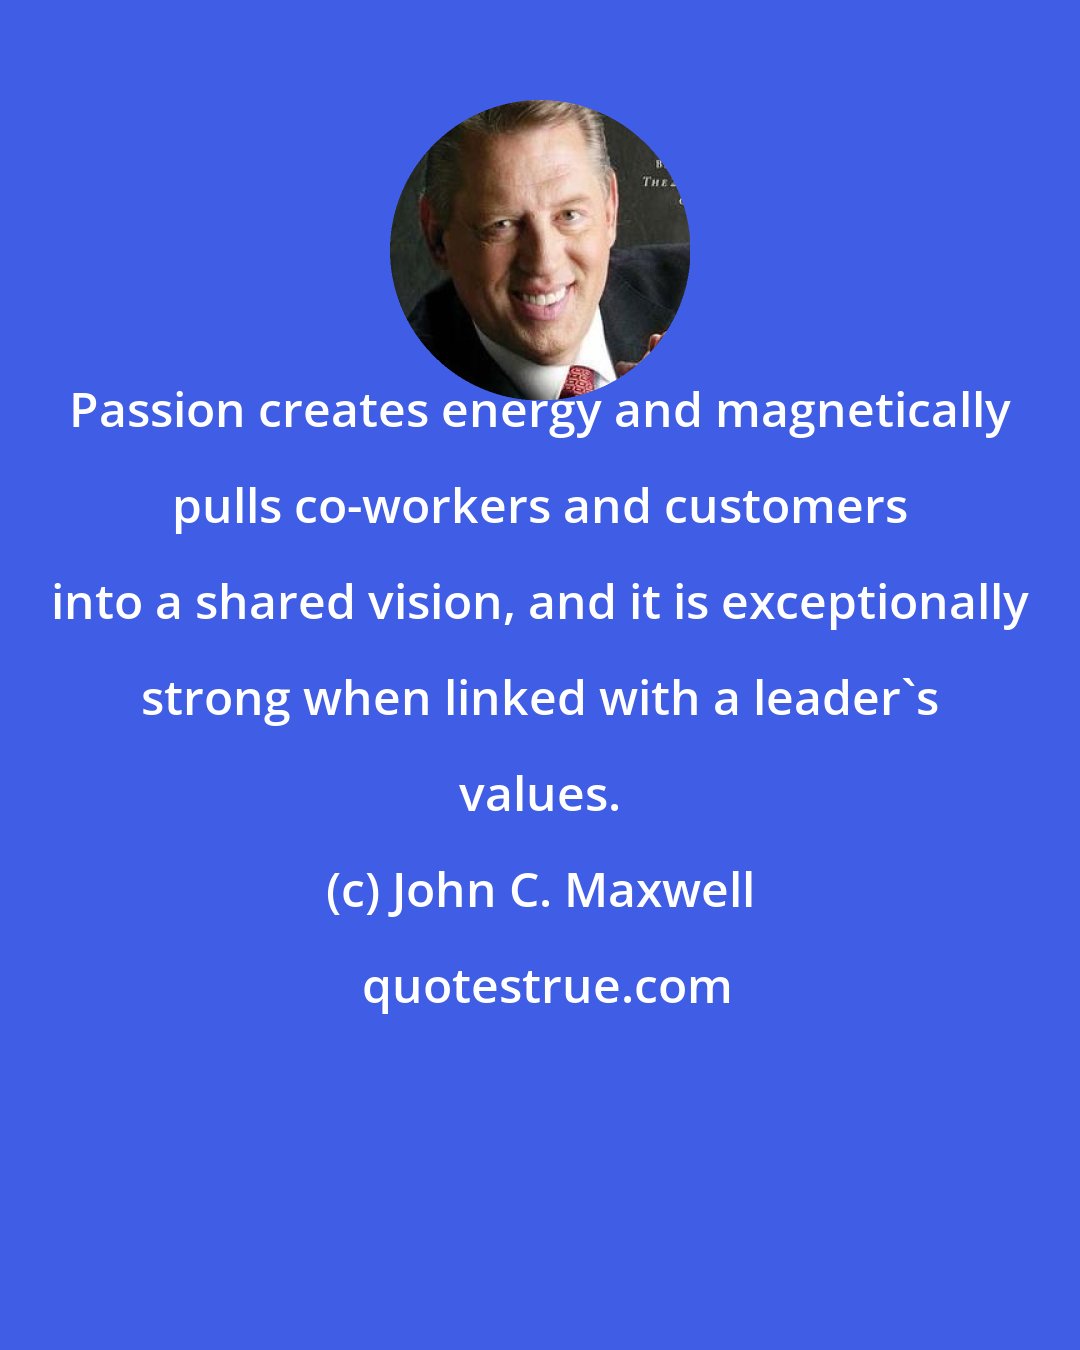 John C. Maxwell: Passion creates energy and magnetically pulls co-workers and customers into a shared vision, and it is exceptionally strong when linked with a leader's values.